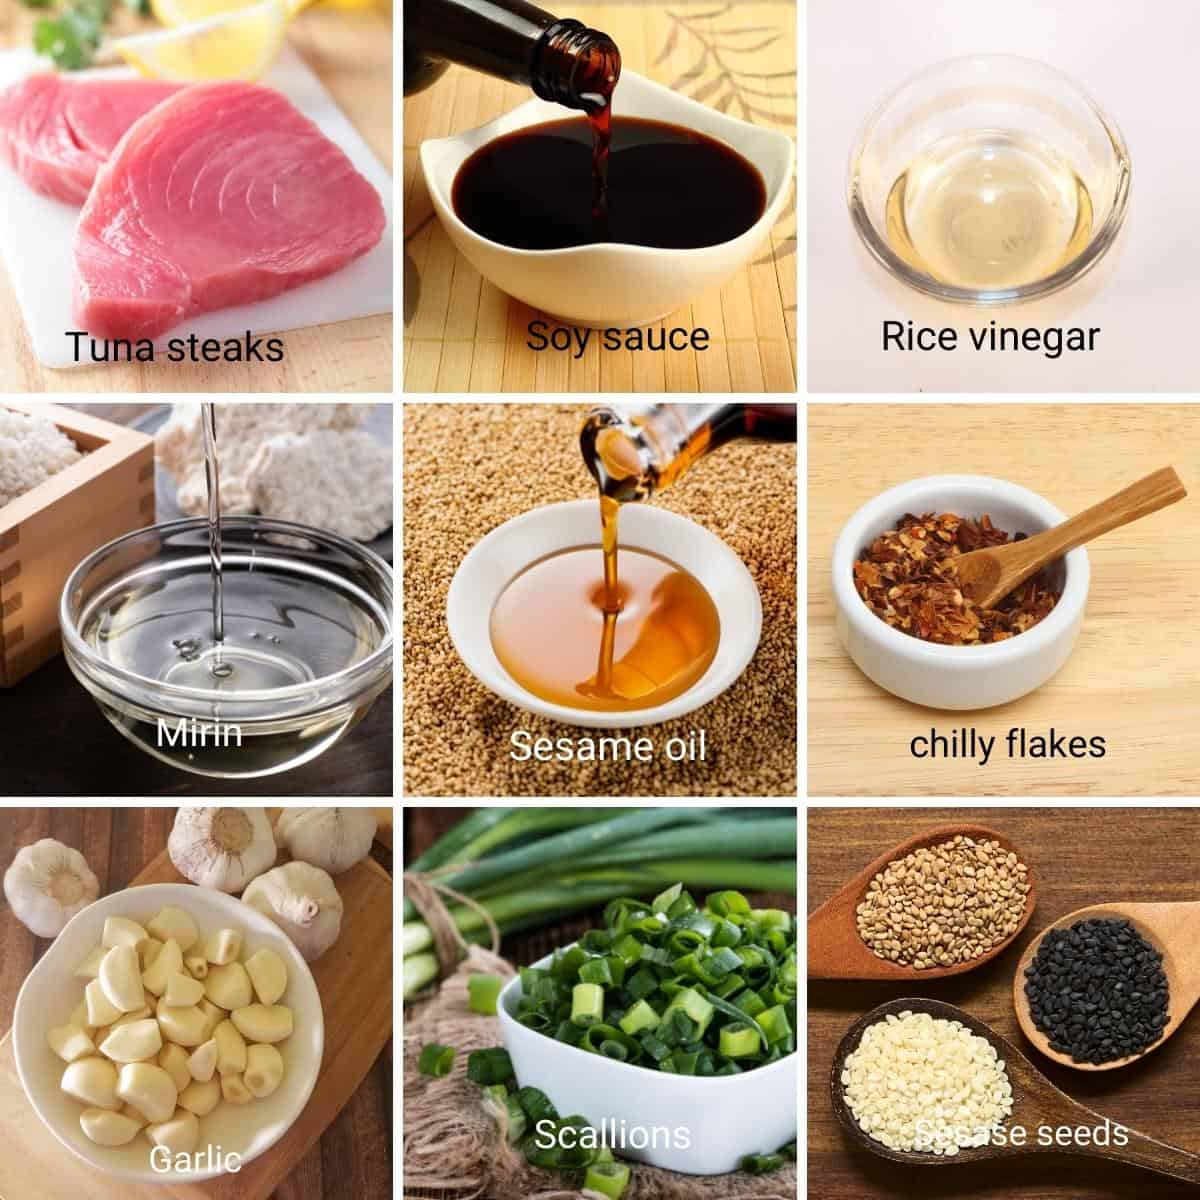 Ingredients for tuna steak with sesame seeds.